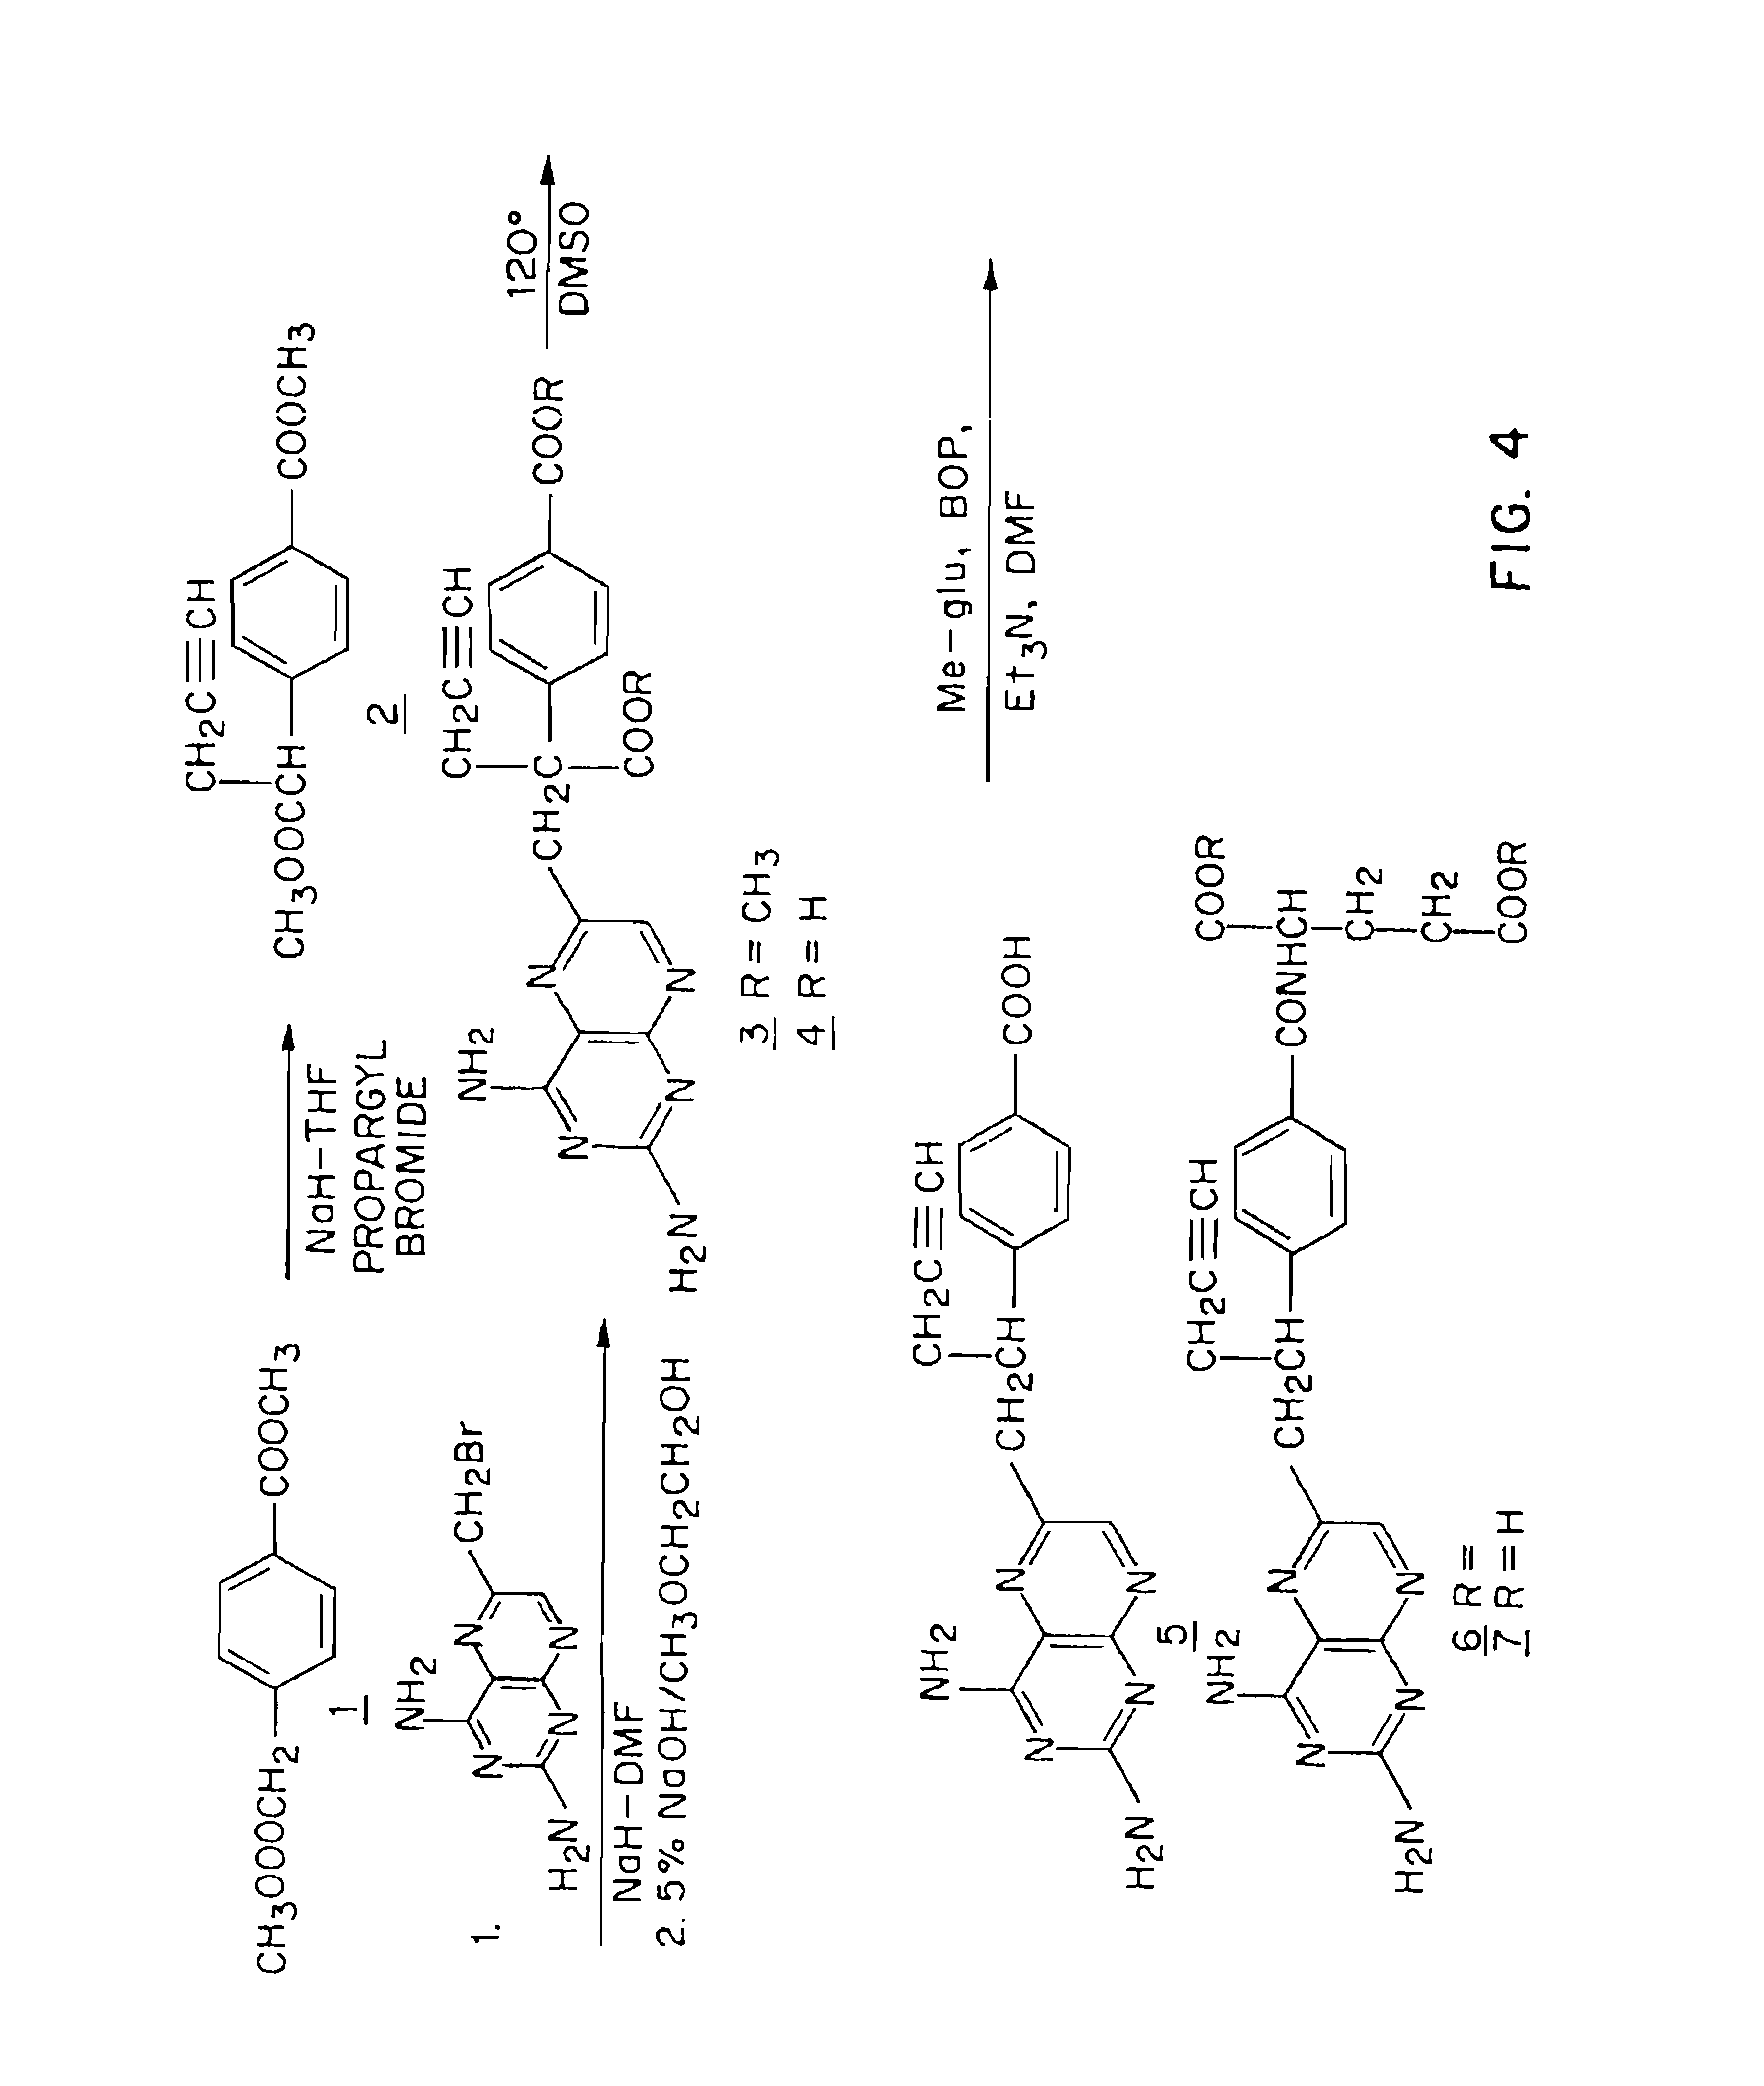 Methods to Treat Cancer with 10-propargyl-10-deazaaminopterin and Methods for Assessing Cancer for Increased Sensitivity to 10-propargyl-10-deazaaminopterin